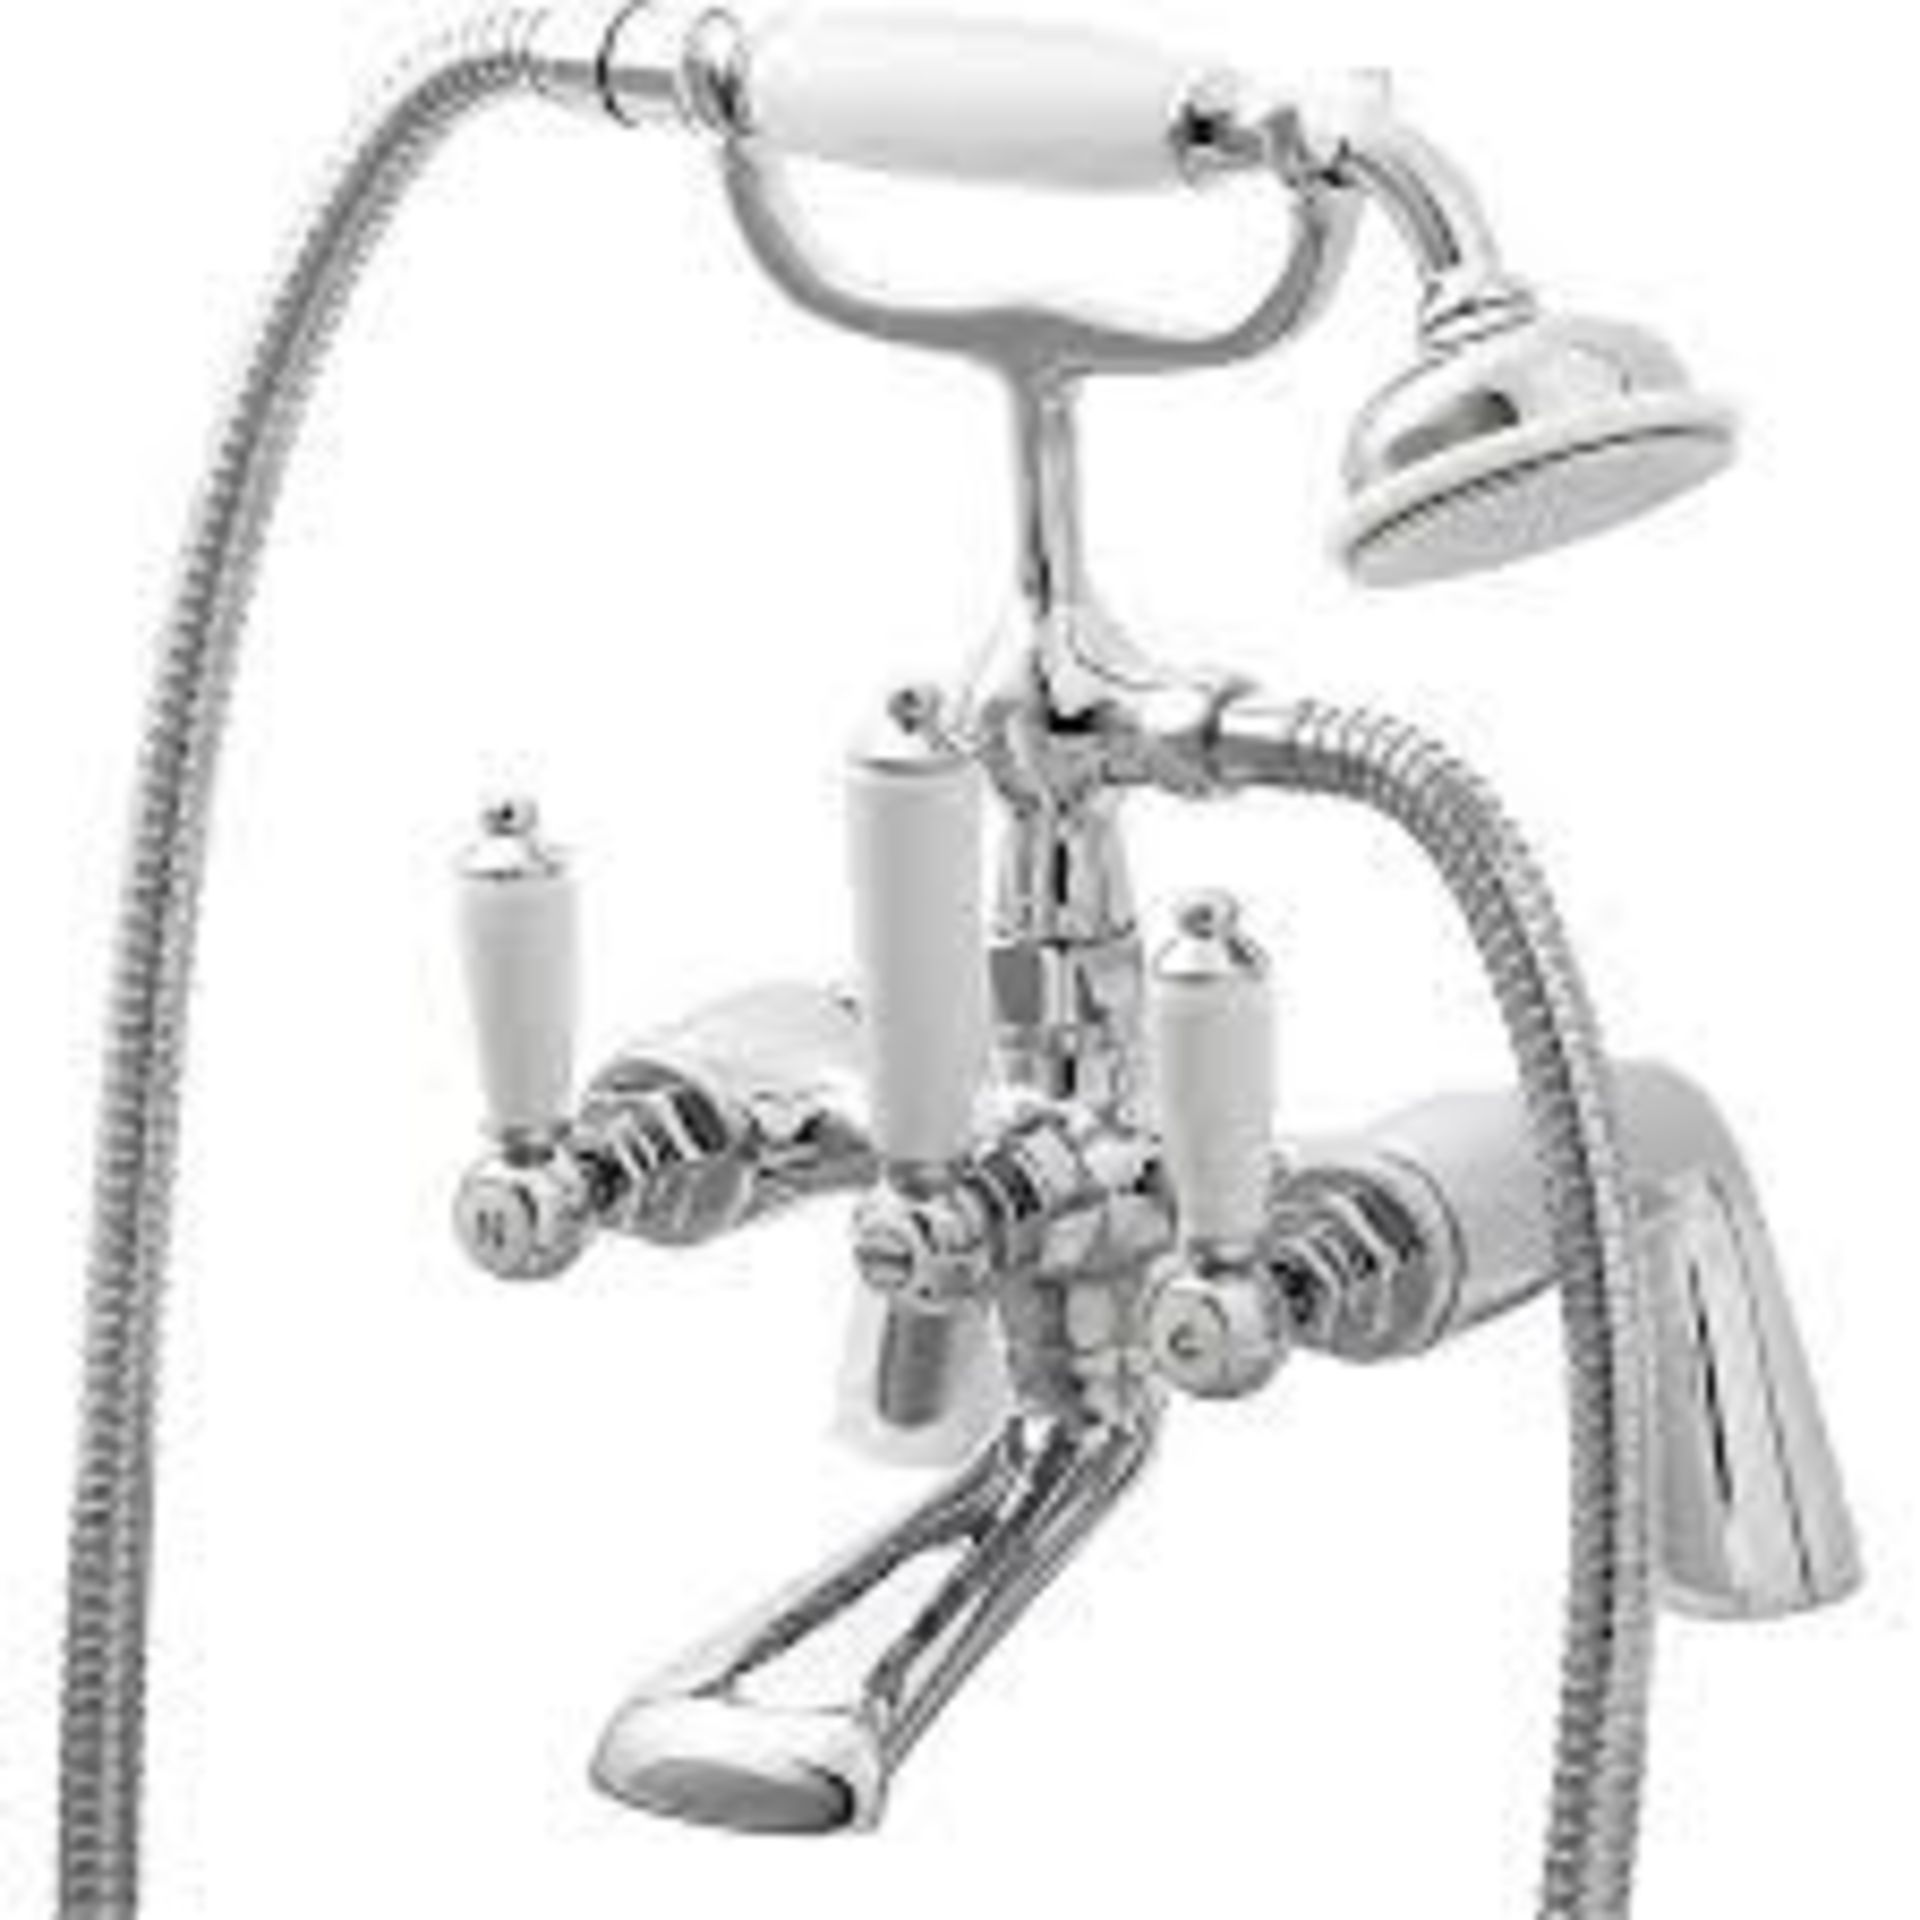 GoodHome Brean Shower mixer Tap. - PW.